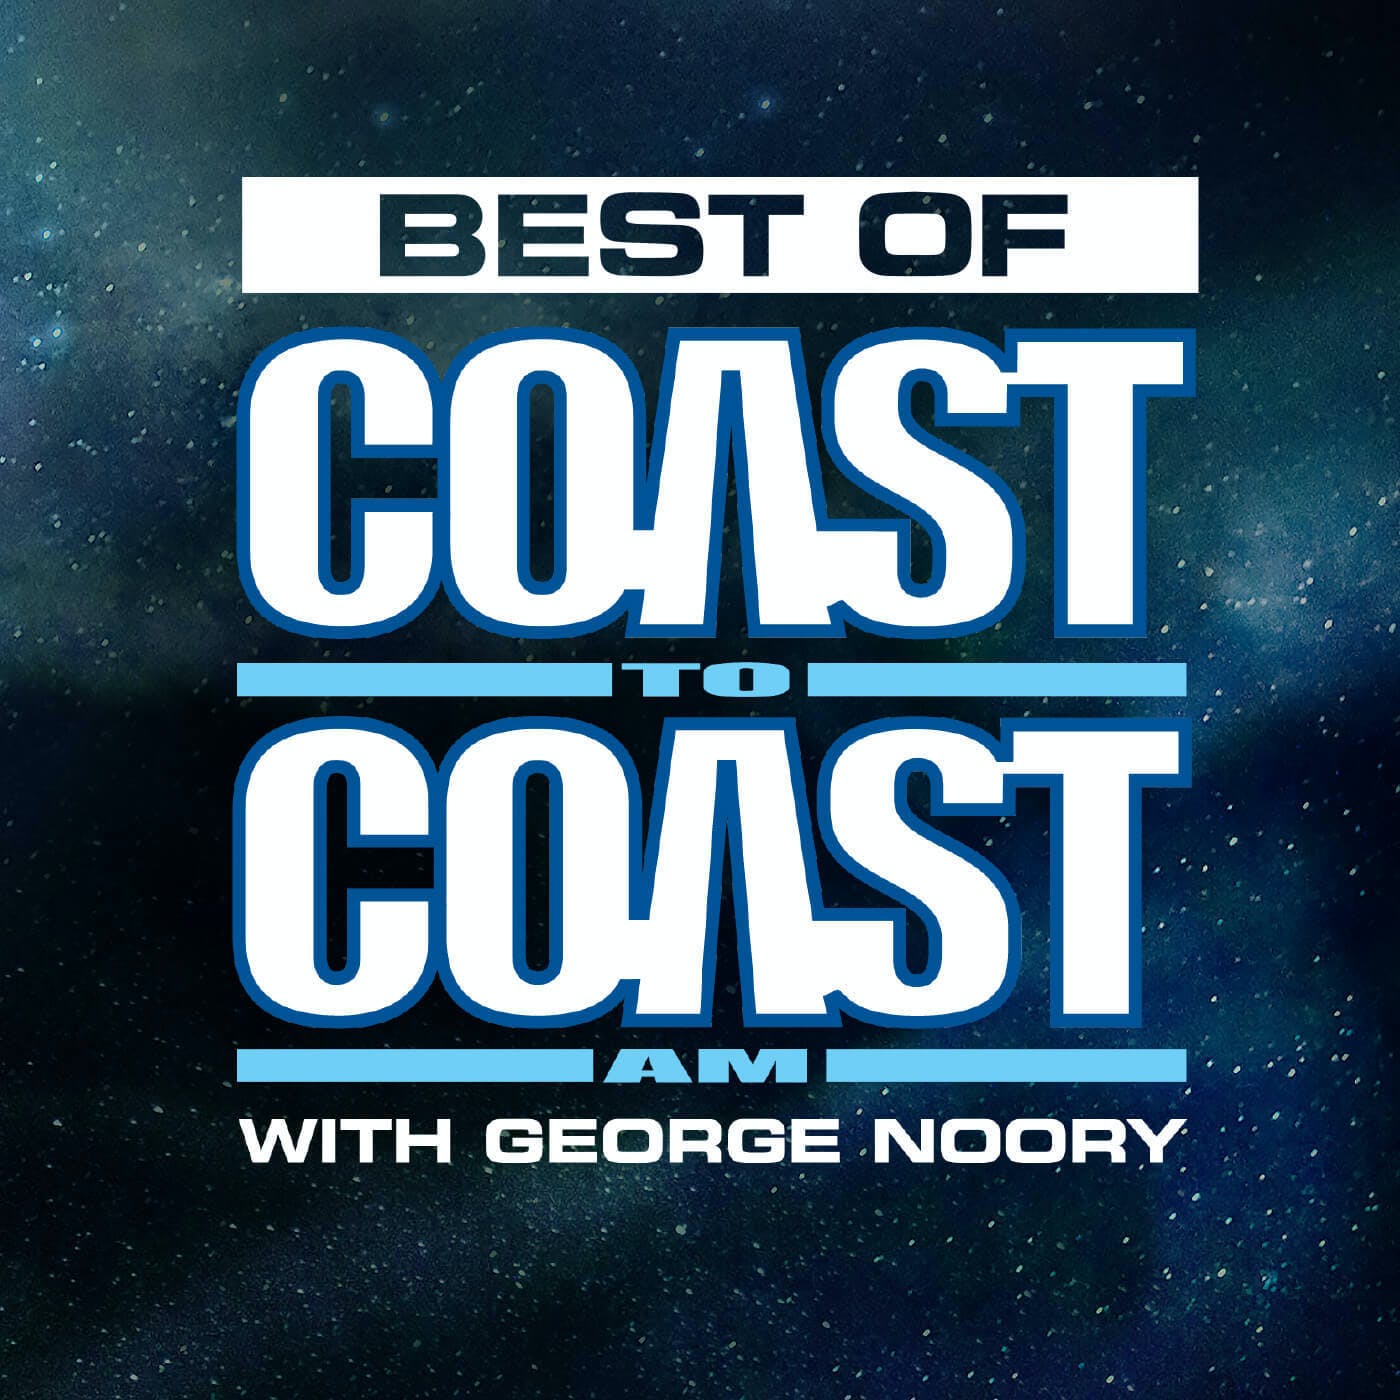 Twin UFO Abductions - Best of Coast to Coast AM - 8/20/21